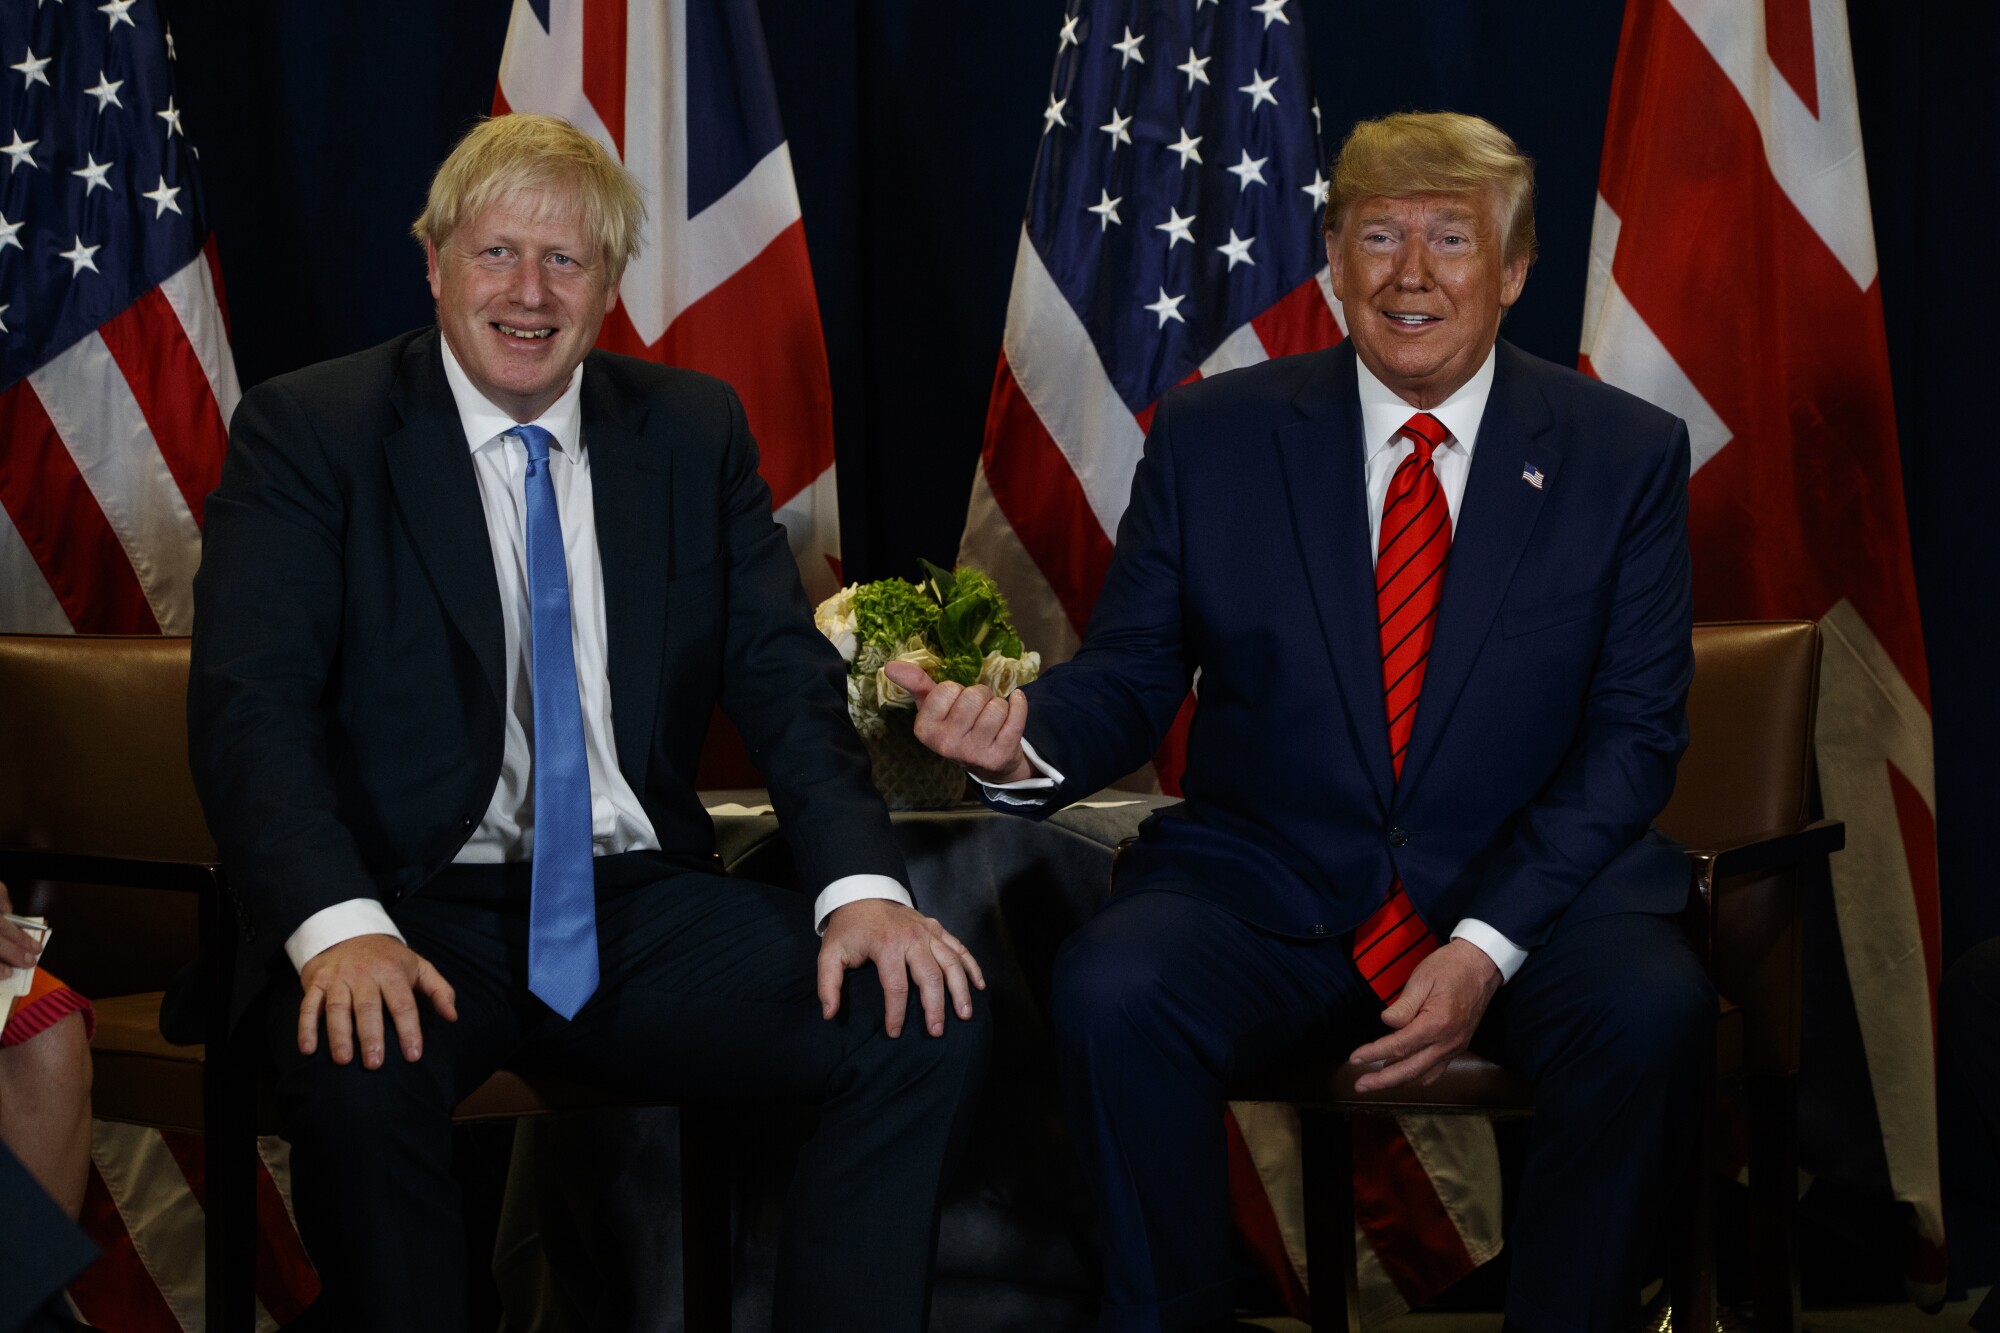 US President Donald Trump met with British Prime Minister Boris Johnson at the UN General Assembly in New York.